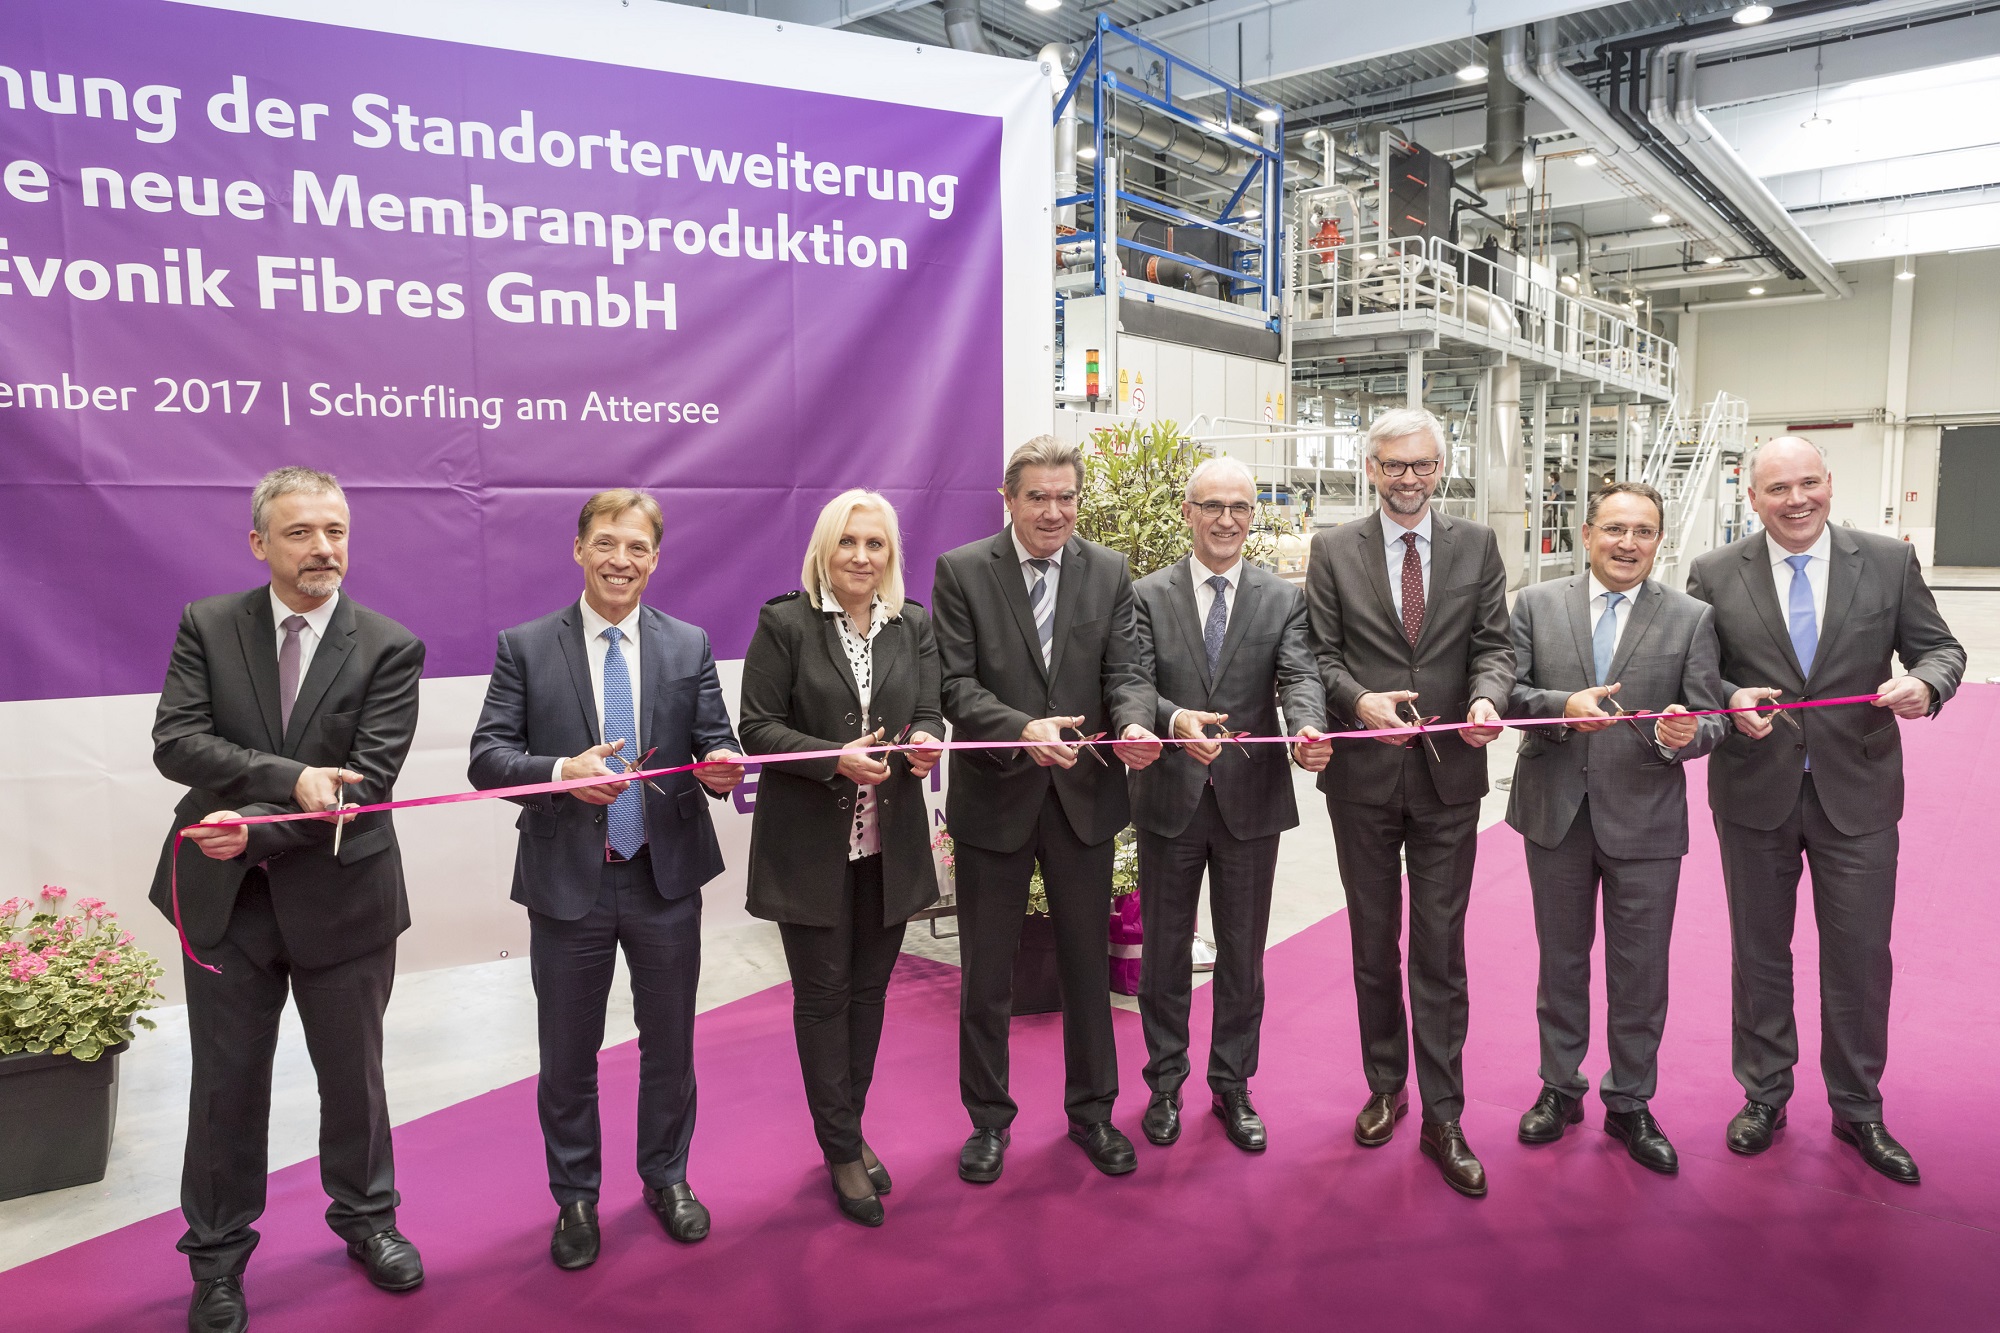 Cutting the ribbon at the opening of Evonik's new membrane plant in Schörfling, Austria.